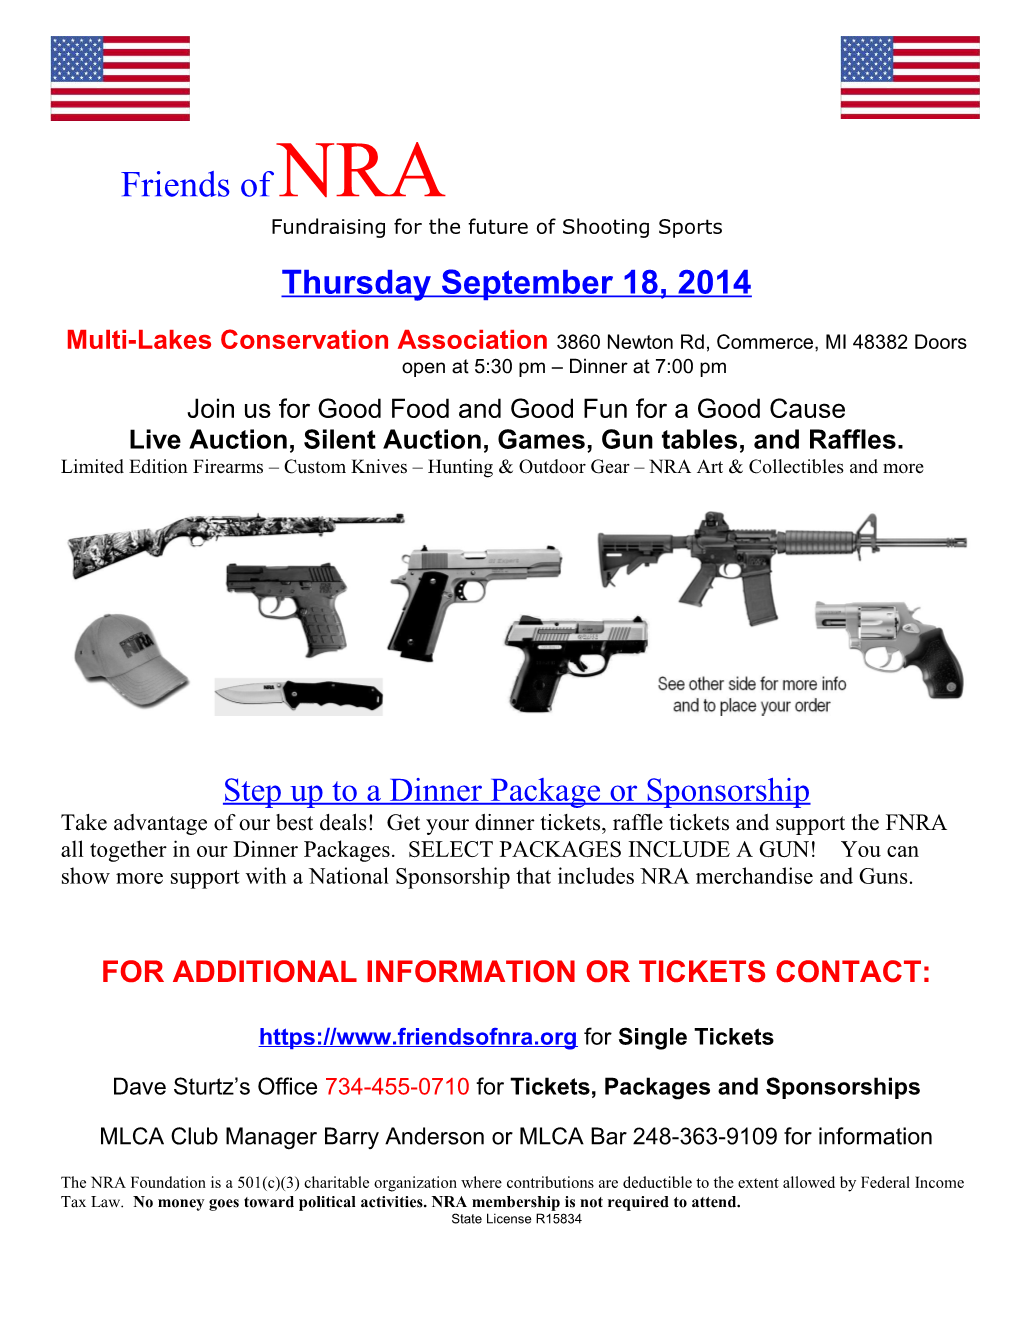 Fundraising for the Future of Shooting Sports